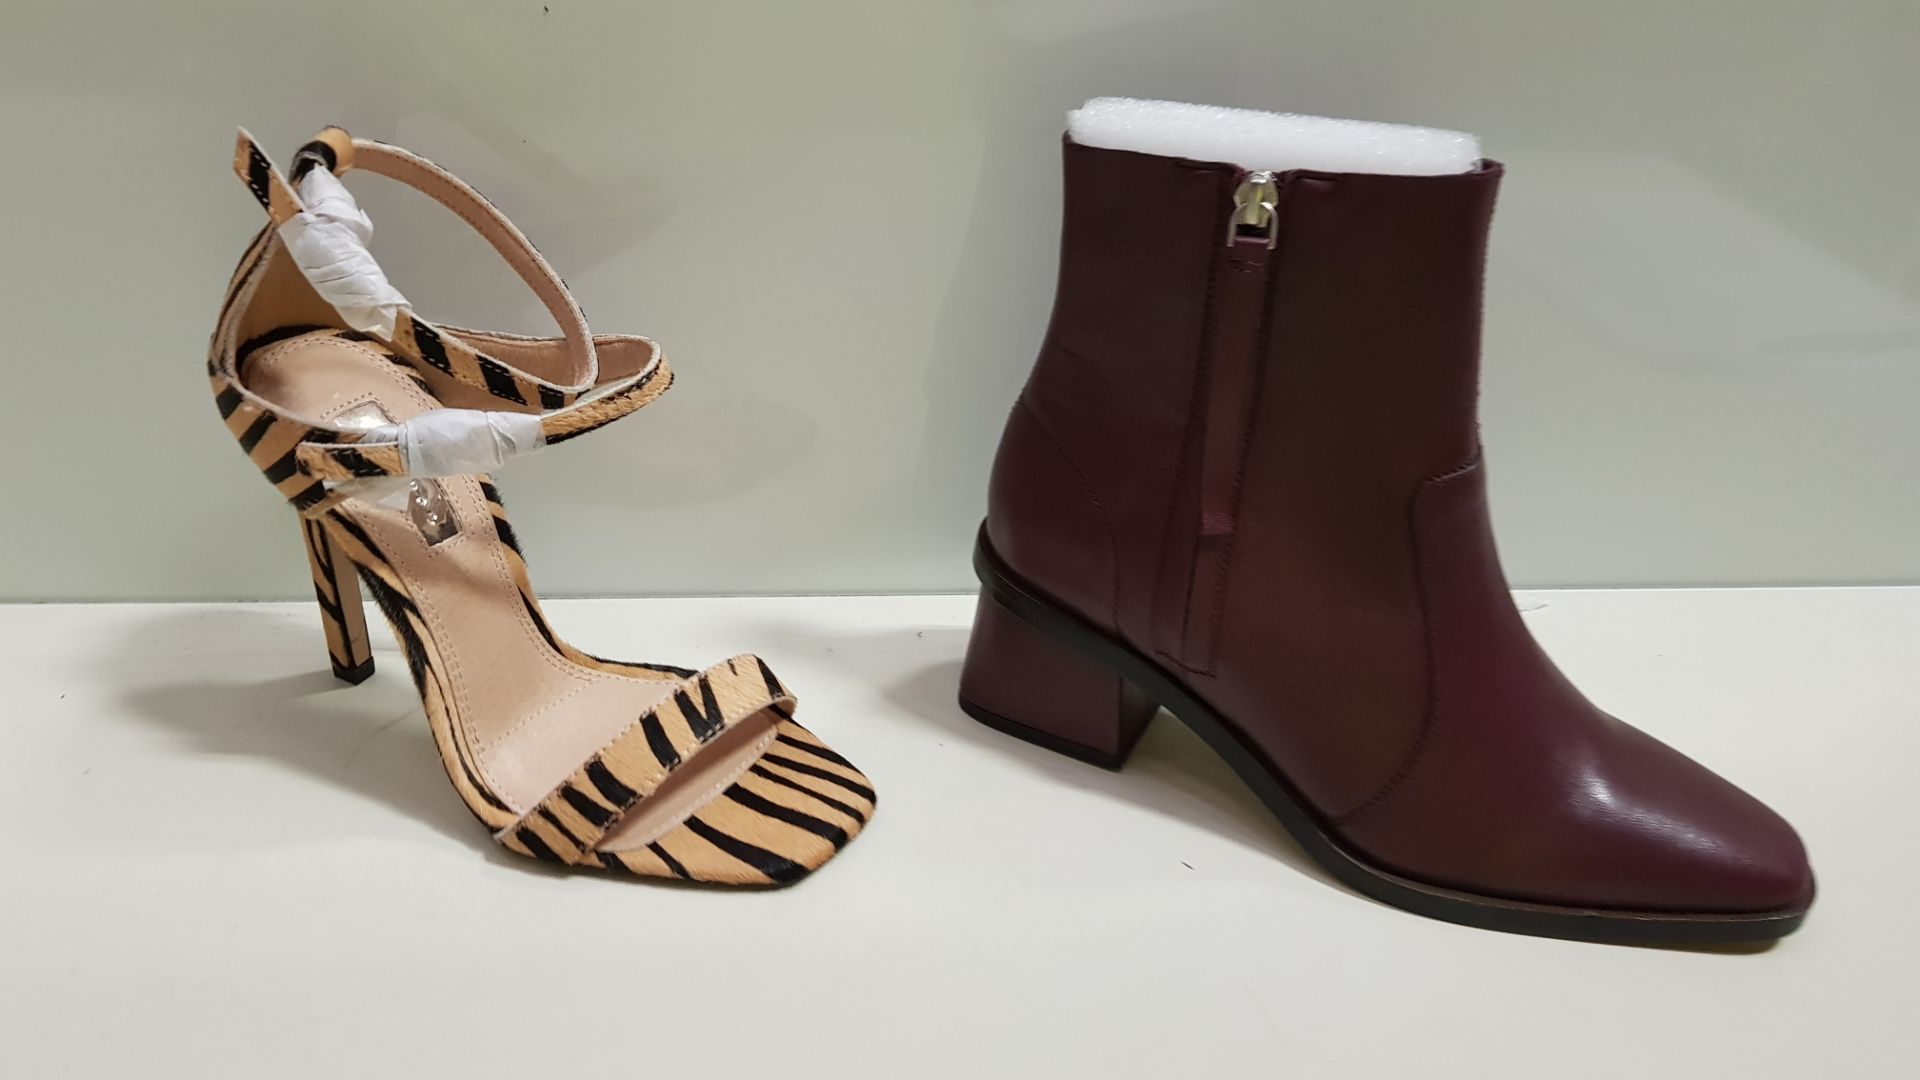 12 PIECE MIXED TOPSHOP SHOE LOT CONTAINING 7 X MARGOT BURGUNDY HEELED ZIP UP ANKLE BOOTS SIZE 4